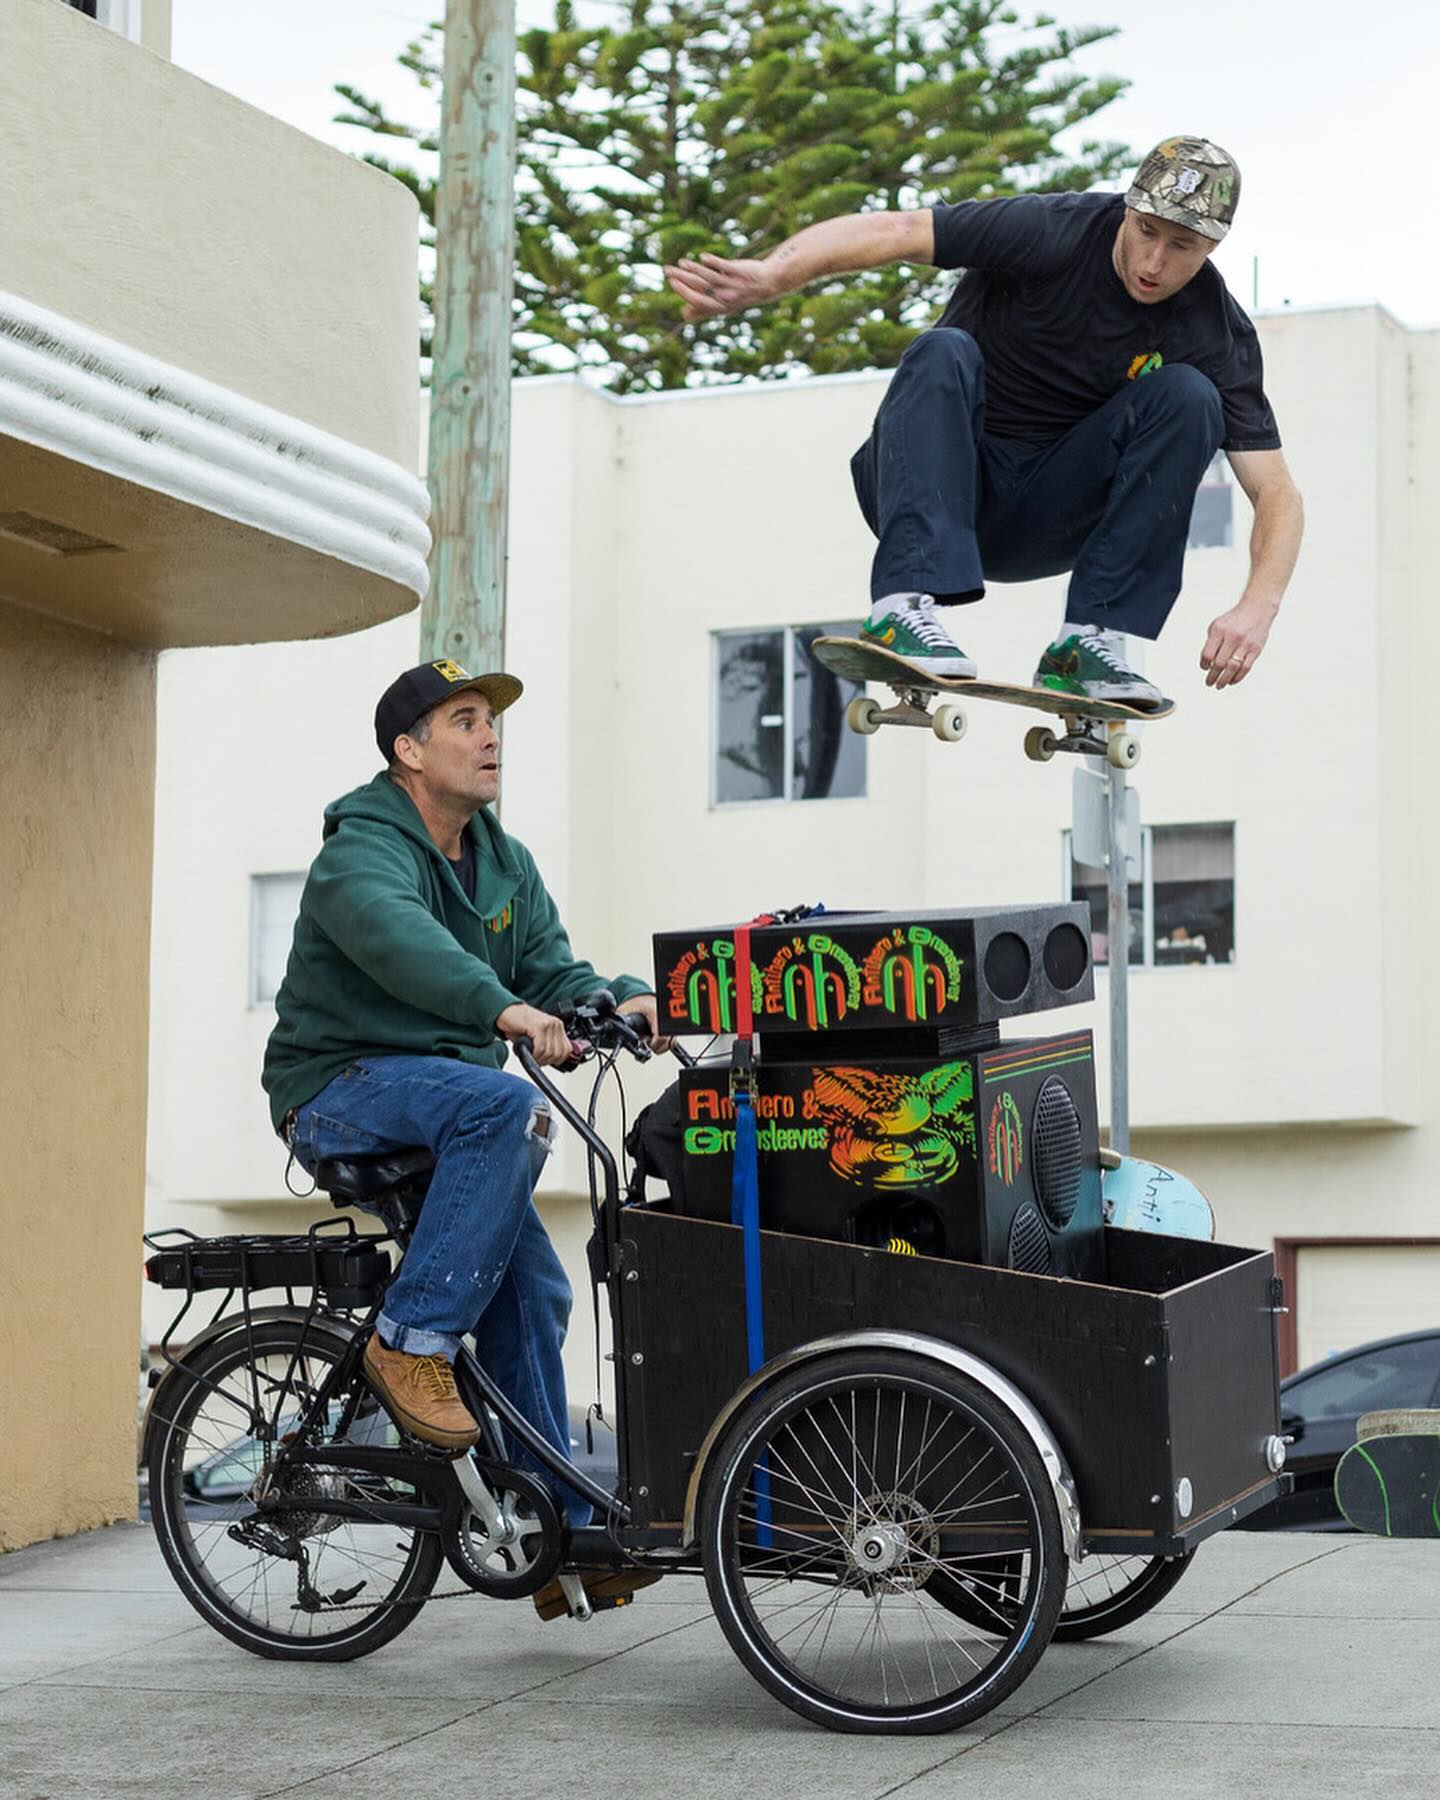 Grant Taylor Ollieing over John Cardiel for the Anti Hero x Greensleeves collab, photo by Mack Scharff - CSC, Cardiff Skateboard Club - UK Skate Shop